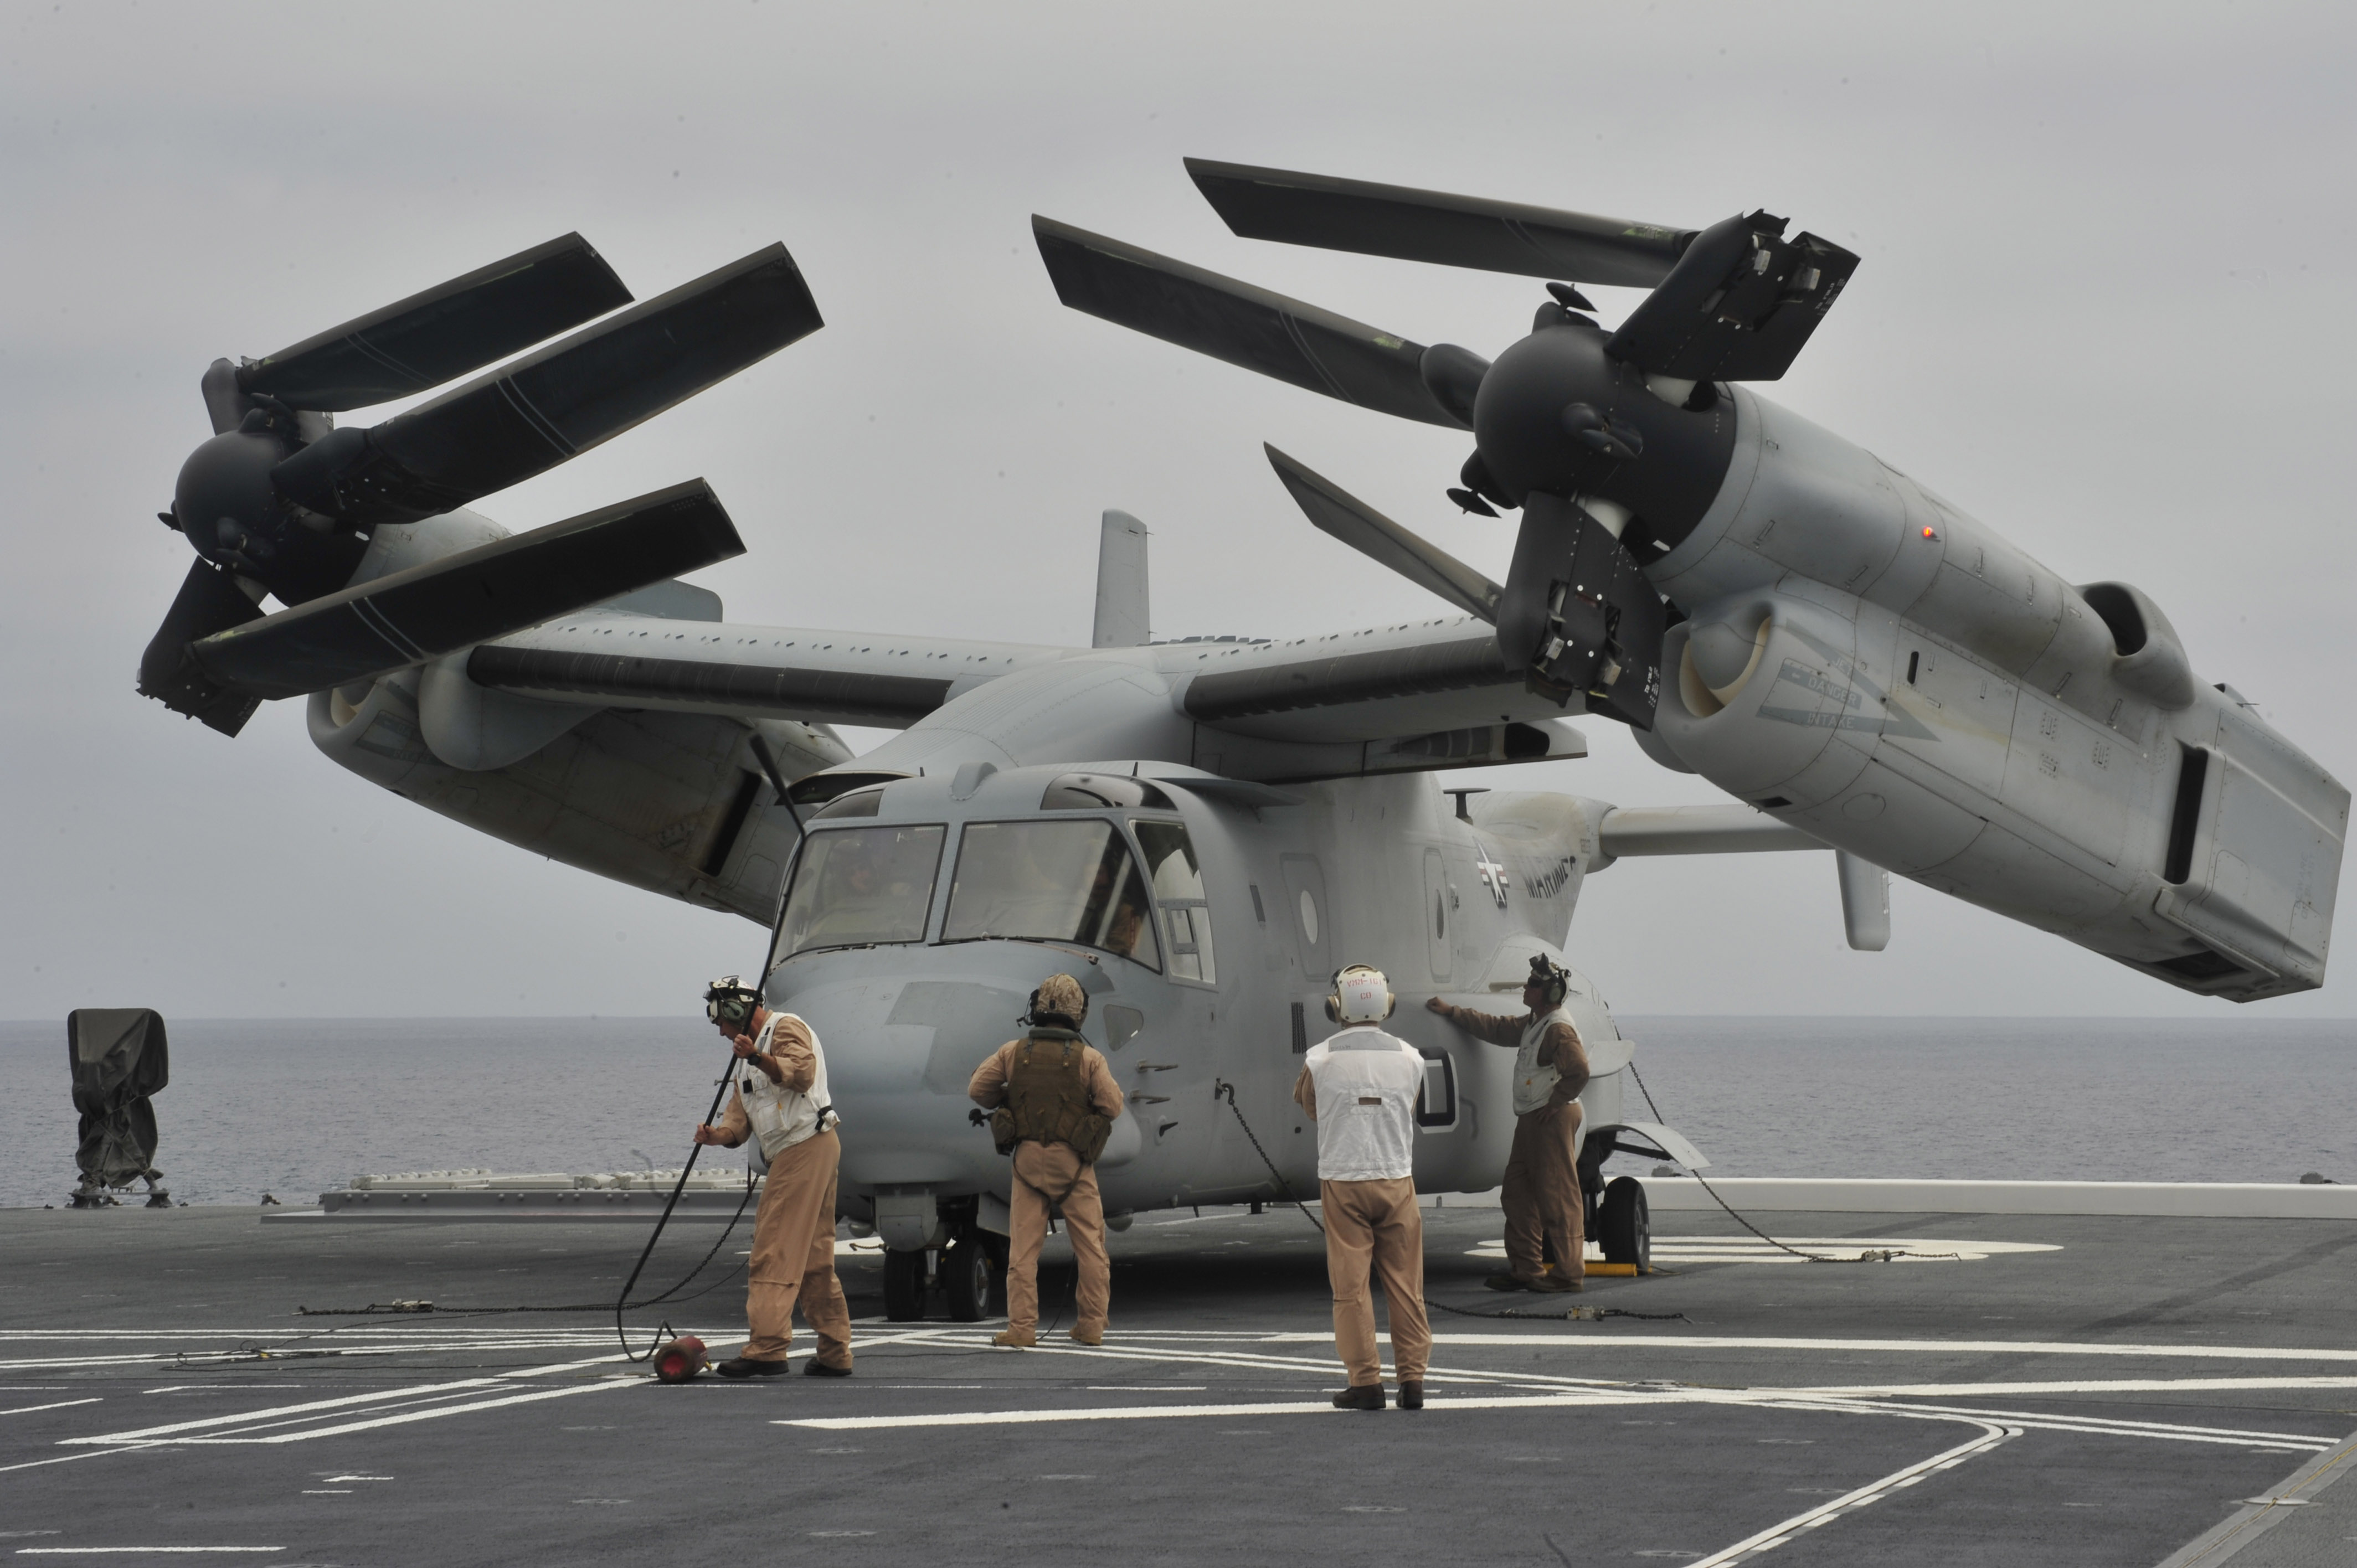 Japan Finalizes Purchase of 5 MV-22s in First International Osprey ...